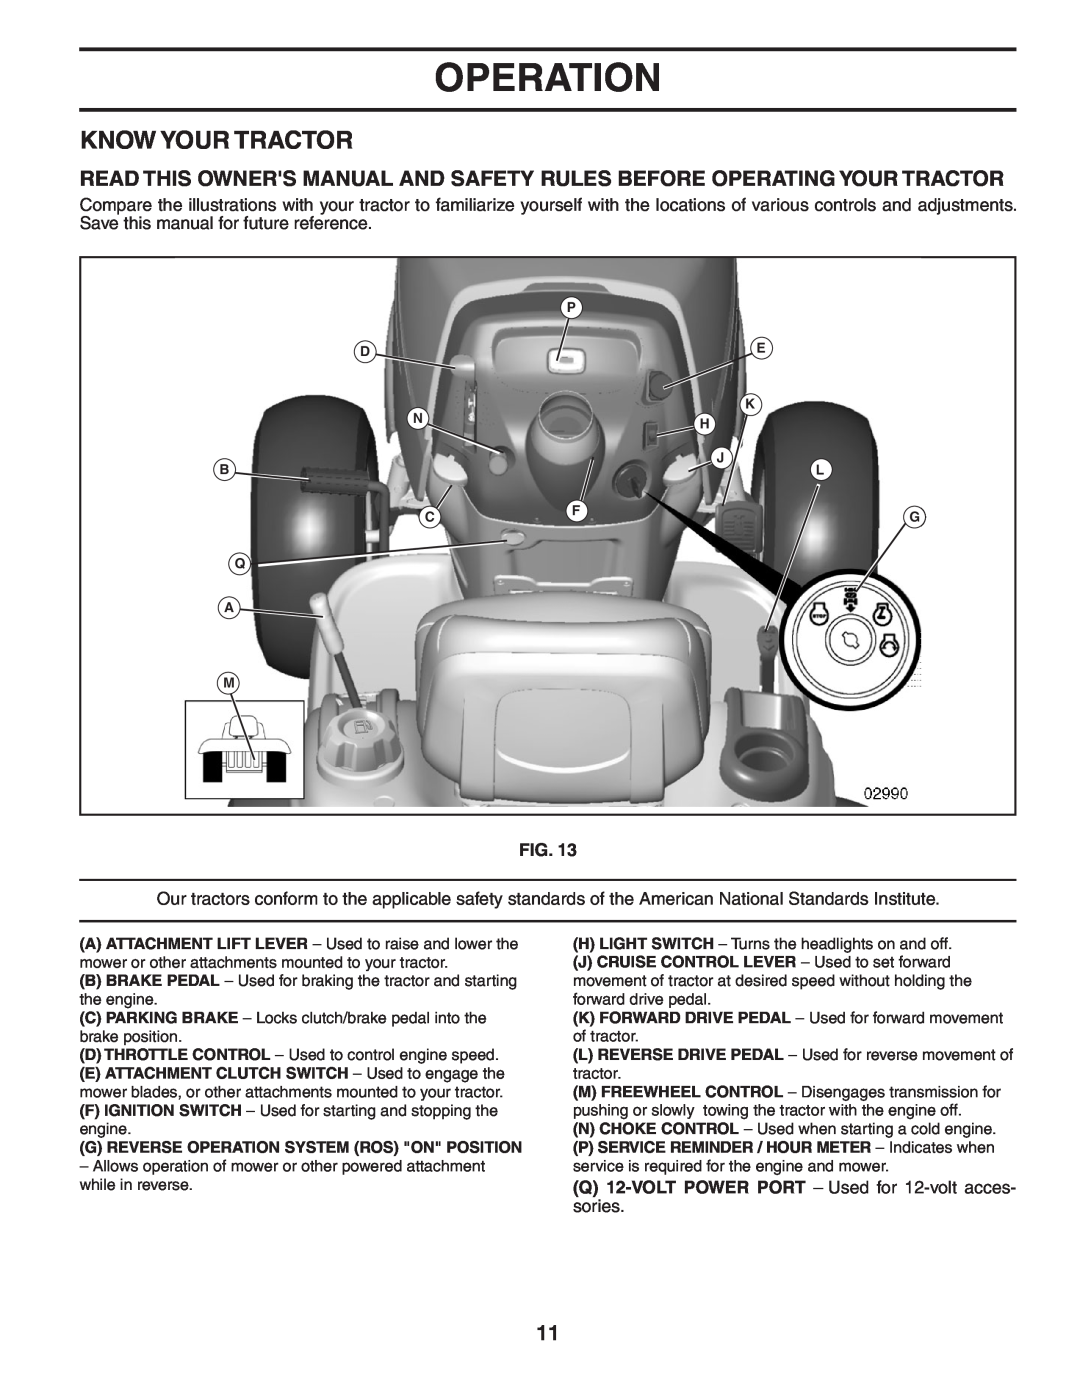 Poulan 402495 manual Know Your Tractor, Operation 